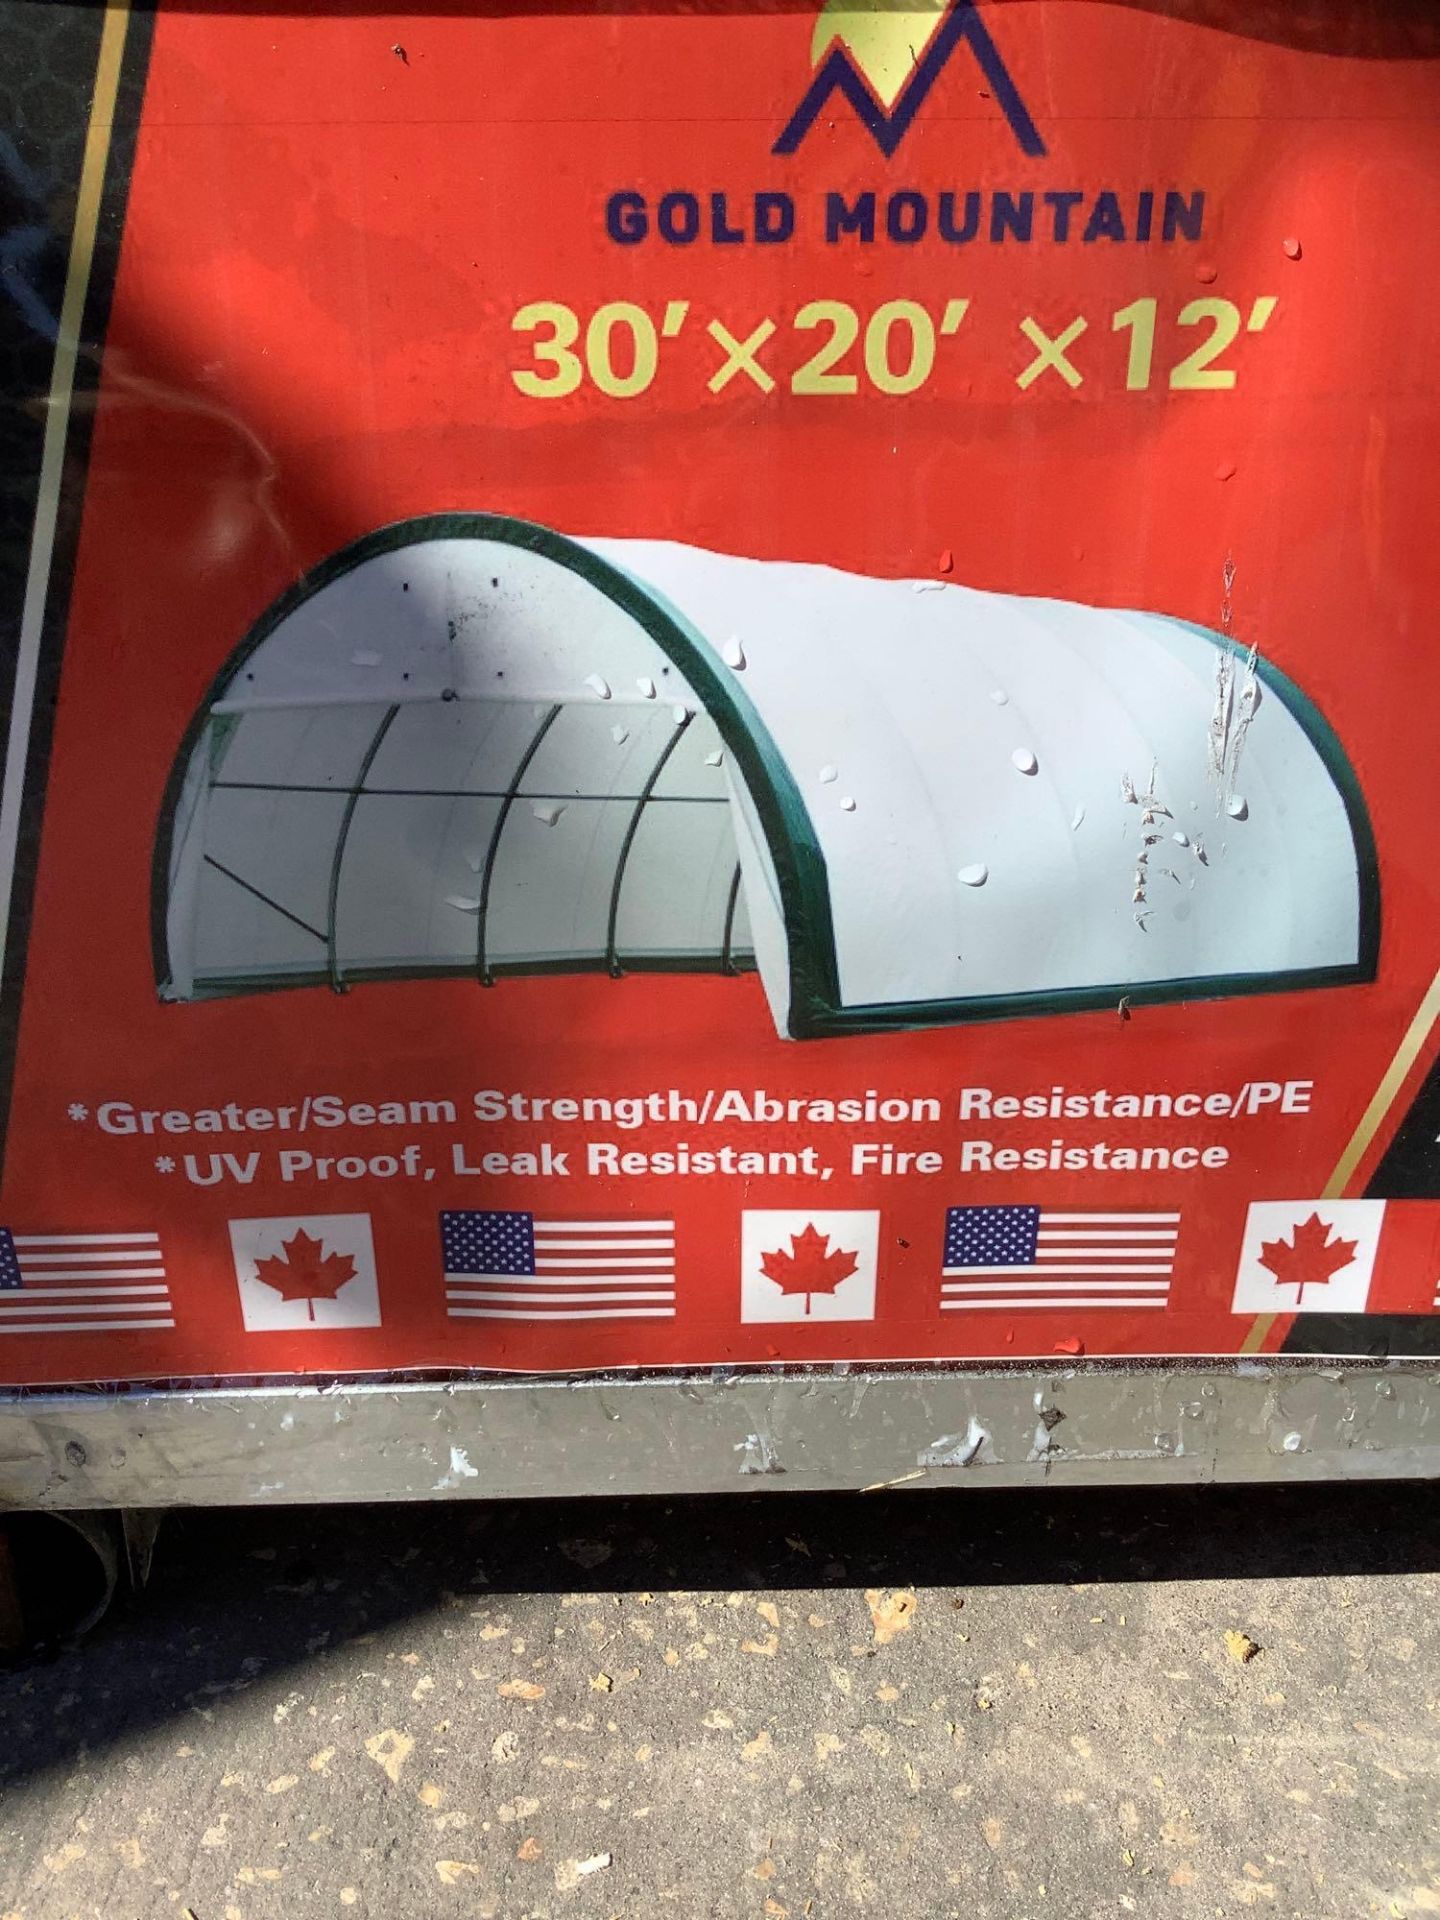 UNUSED GOLD MOUNTAIN DOME STORAGE SHELTER MODEL S203012R, APPROX 30’ x 20’ x 12’ , GREATER SEAM STRE - Image 13 of 14